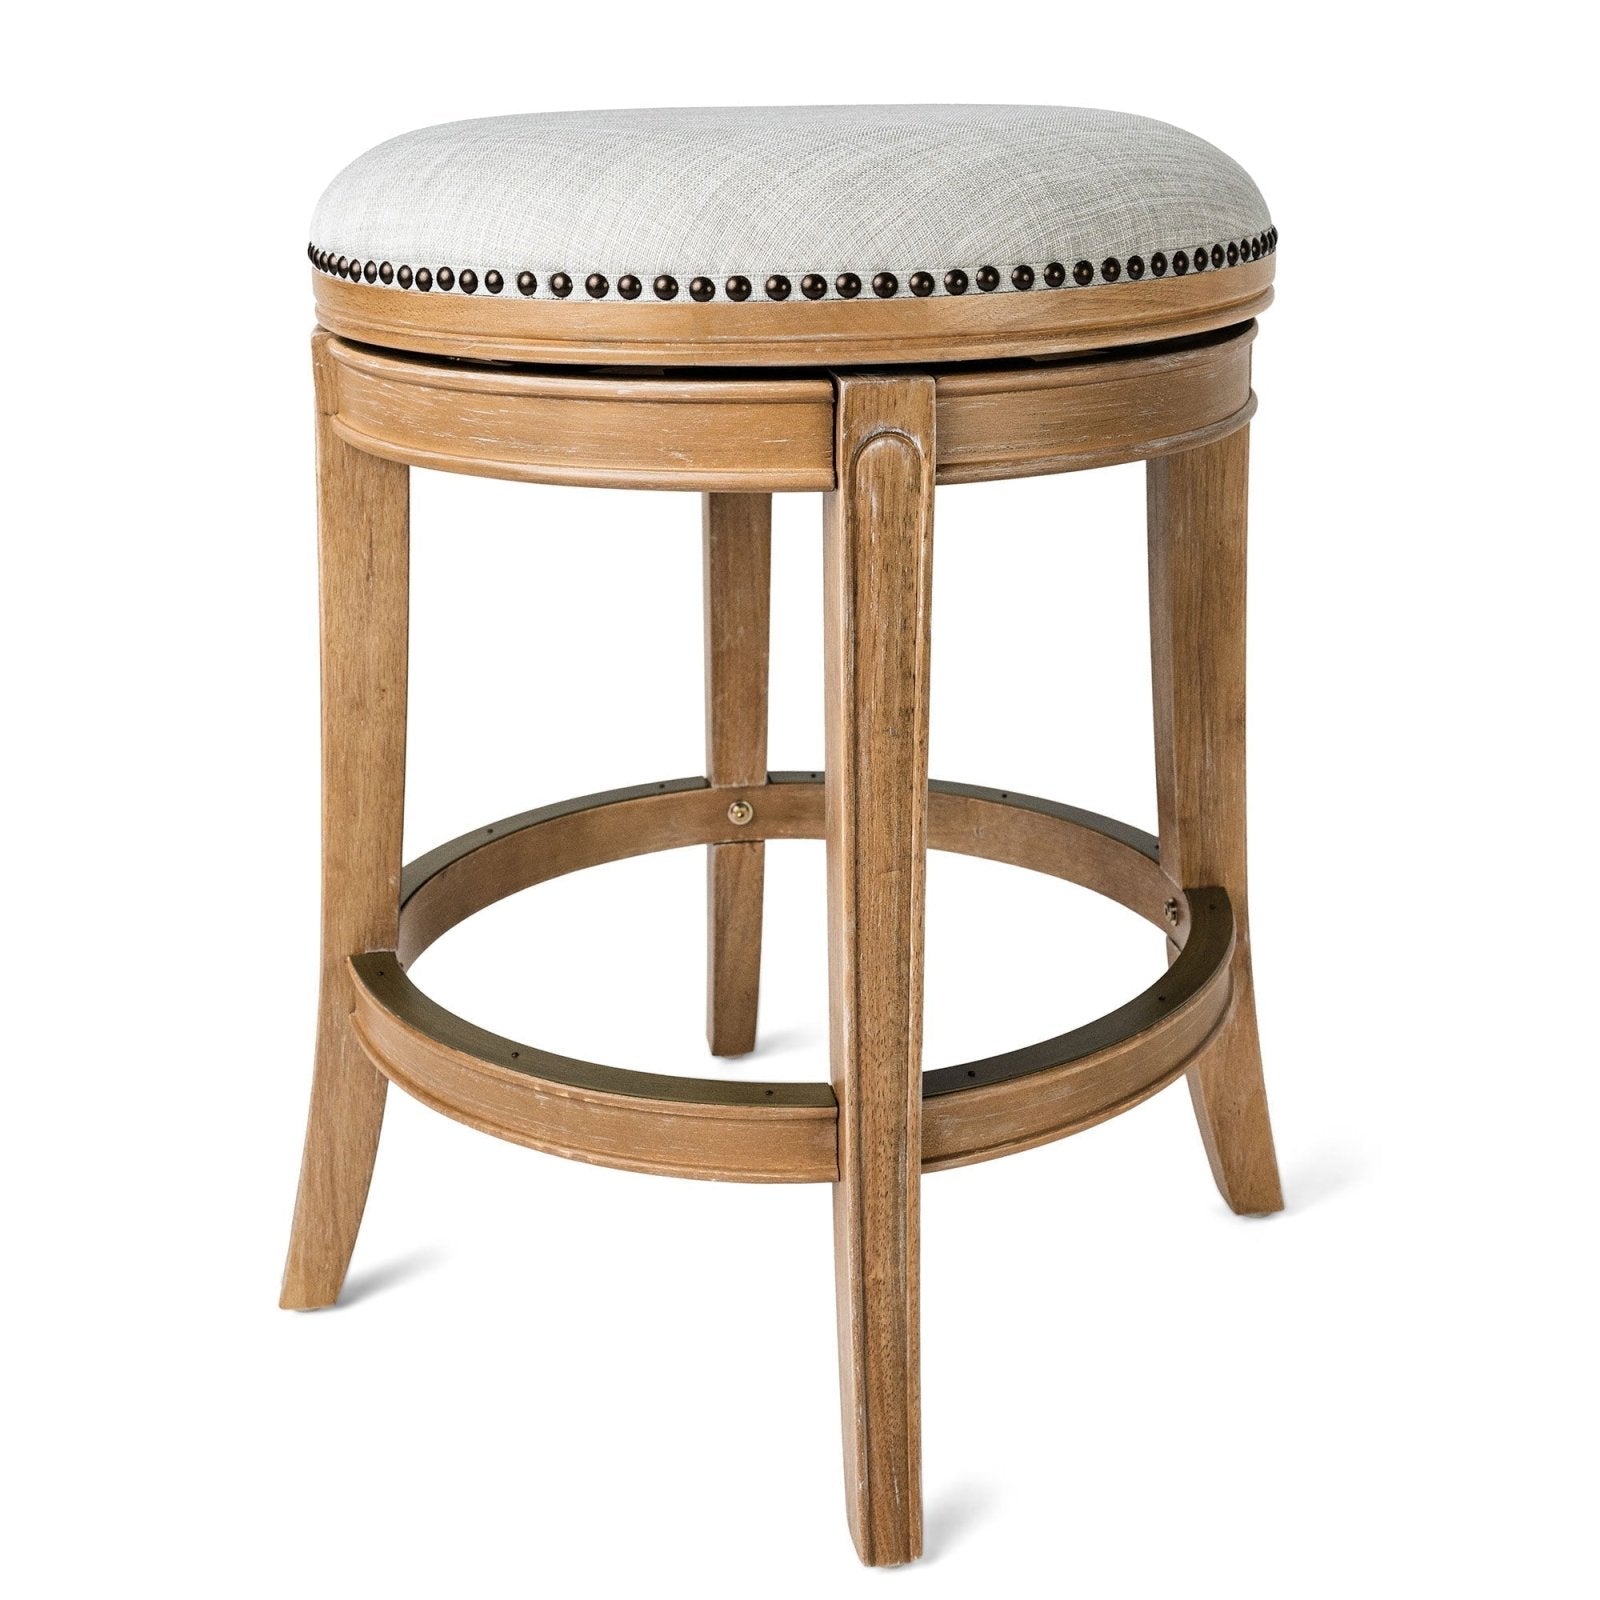 Alexander Backless Counter Stool in Weathered Oak Finish w/ Sand Color Fabric Upholstery